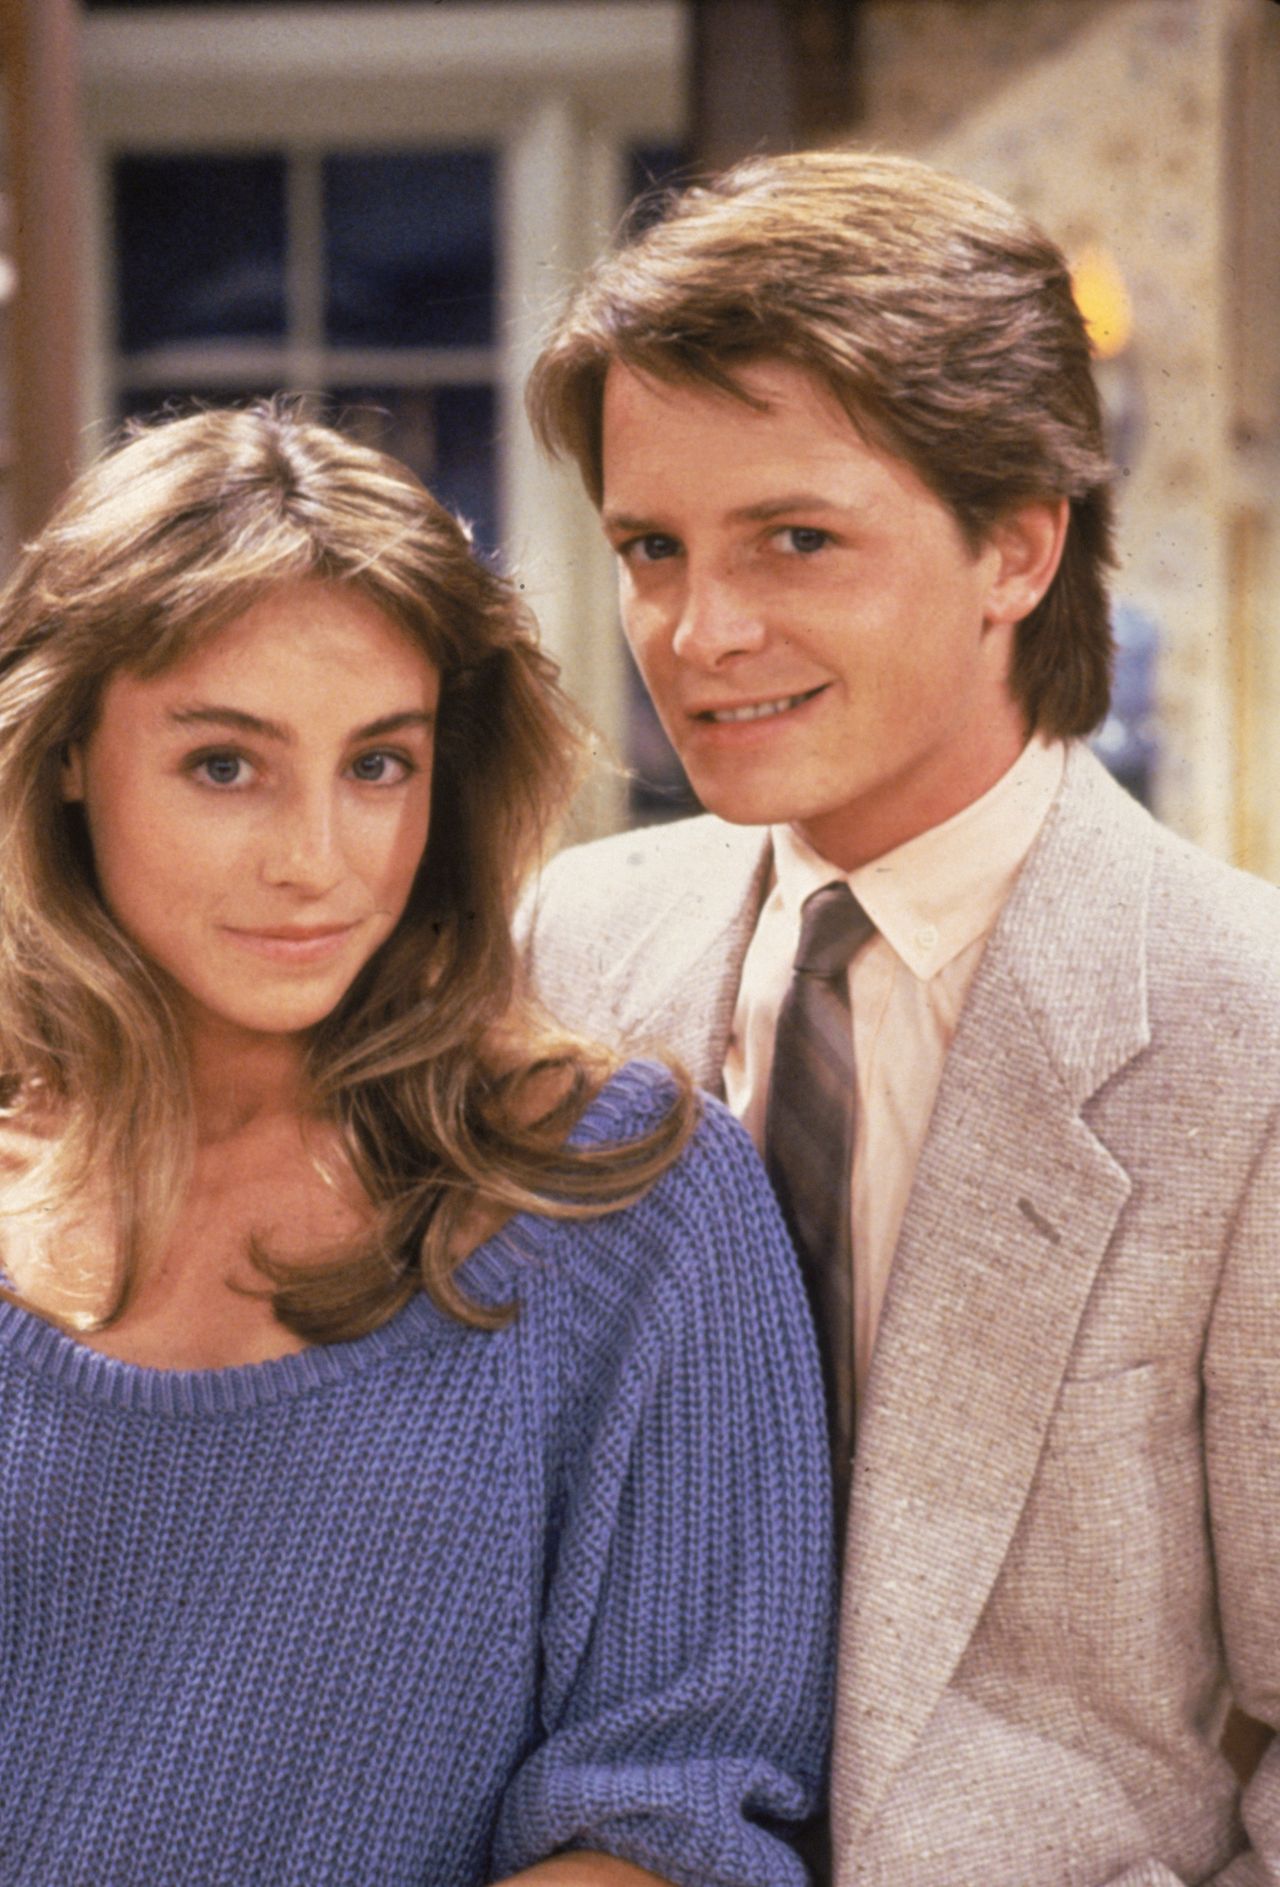 Tracy Pollan and Michael J. Fox on the set of "Family Ties" around 1986.